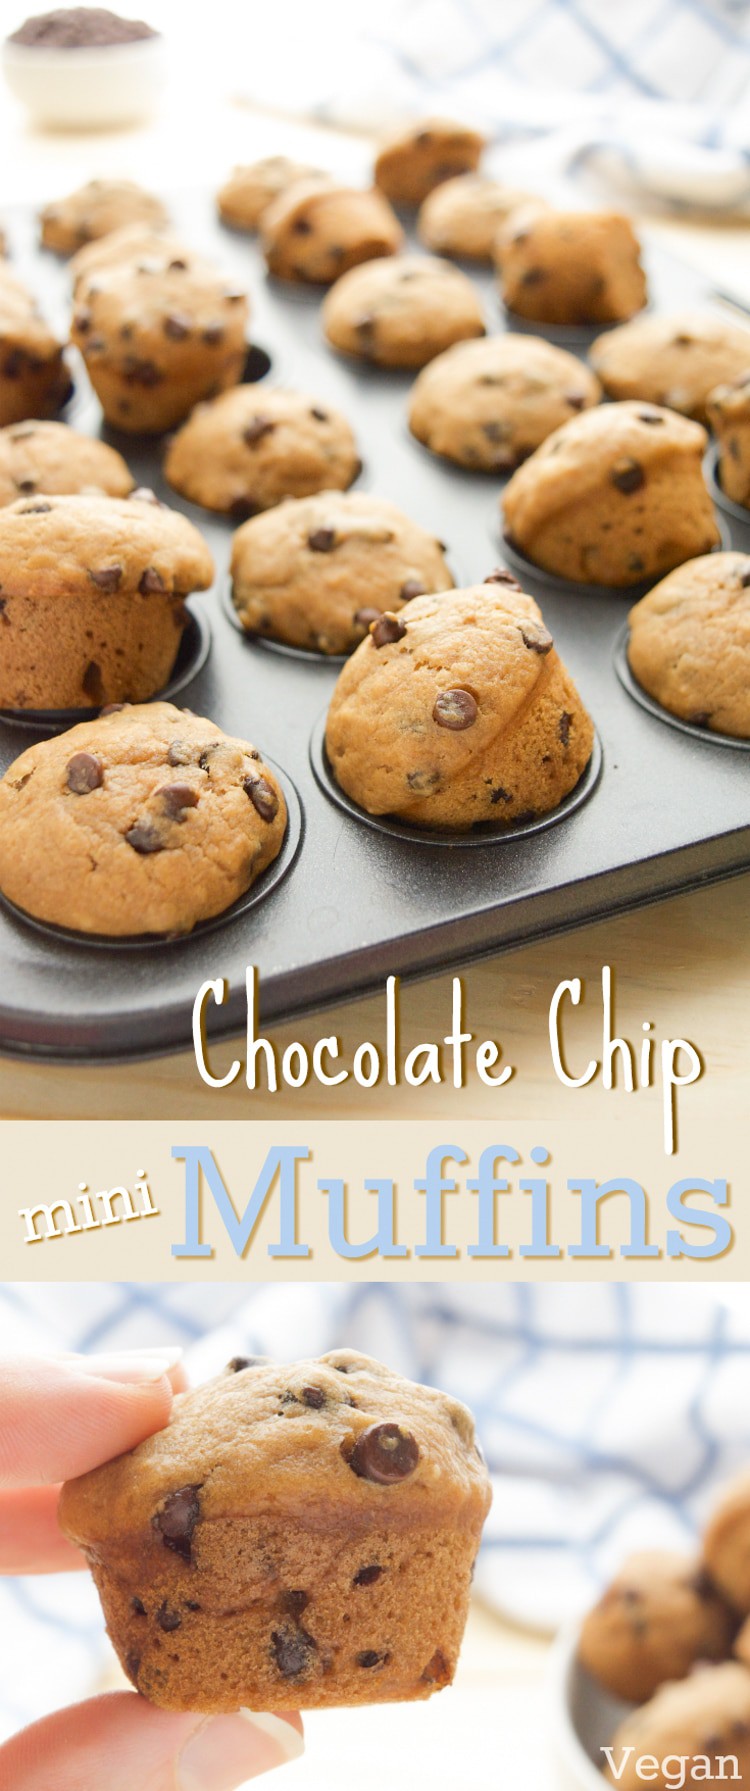 A collage of mini Vegan Chocolate Chip Muffins for Pinterest.